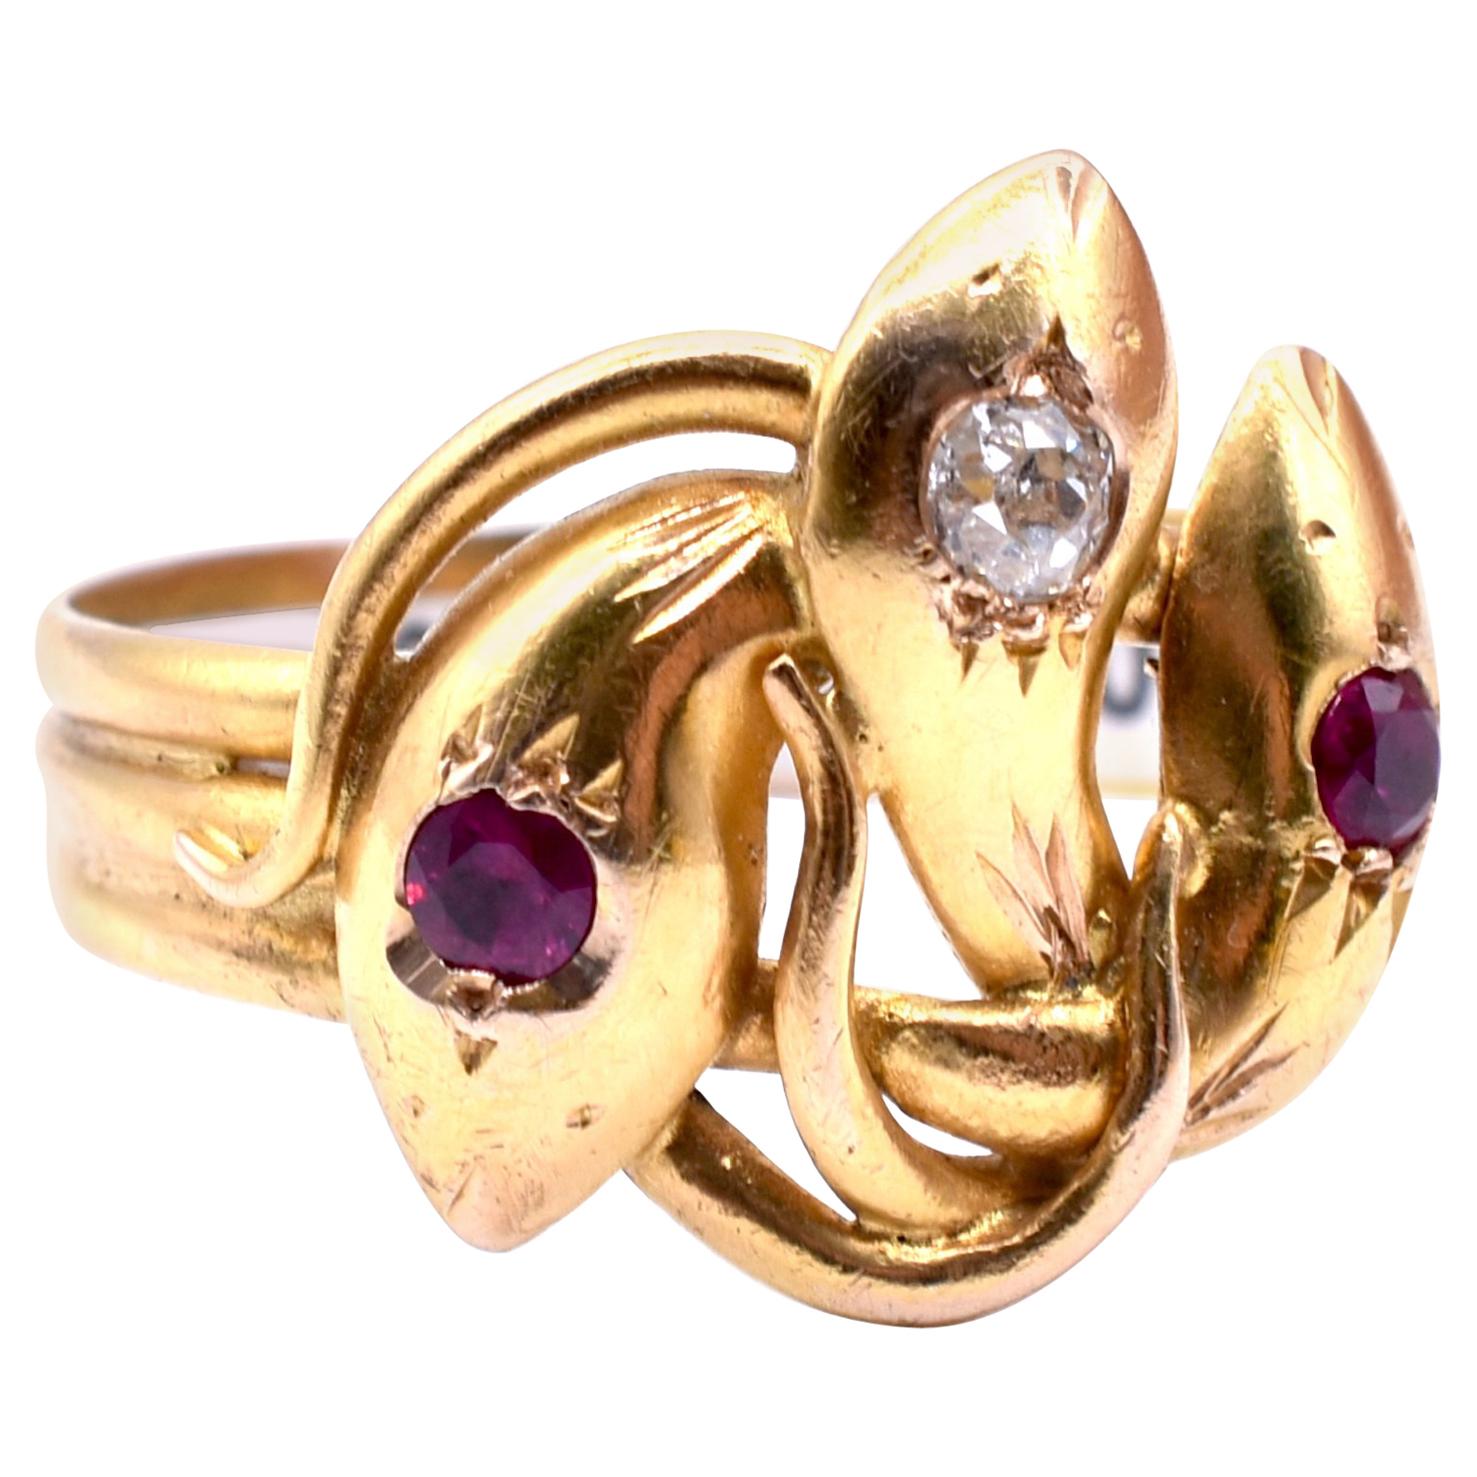 Three Headed Snake Ring with Rubies and Diamonds